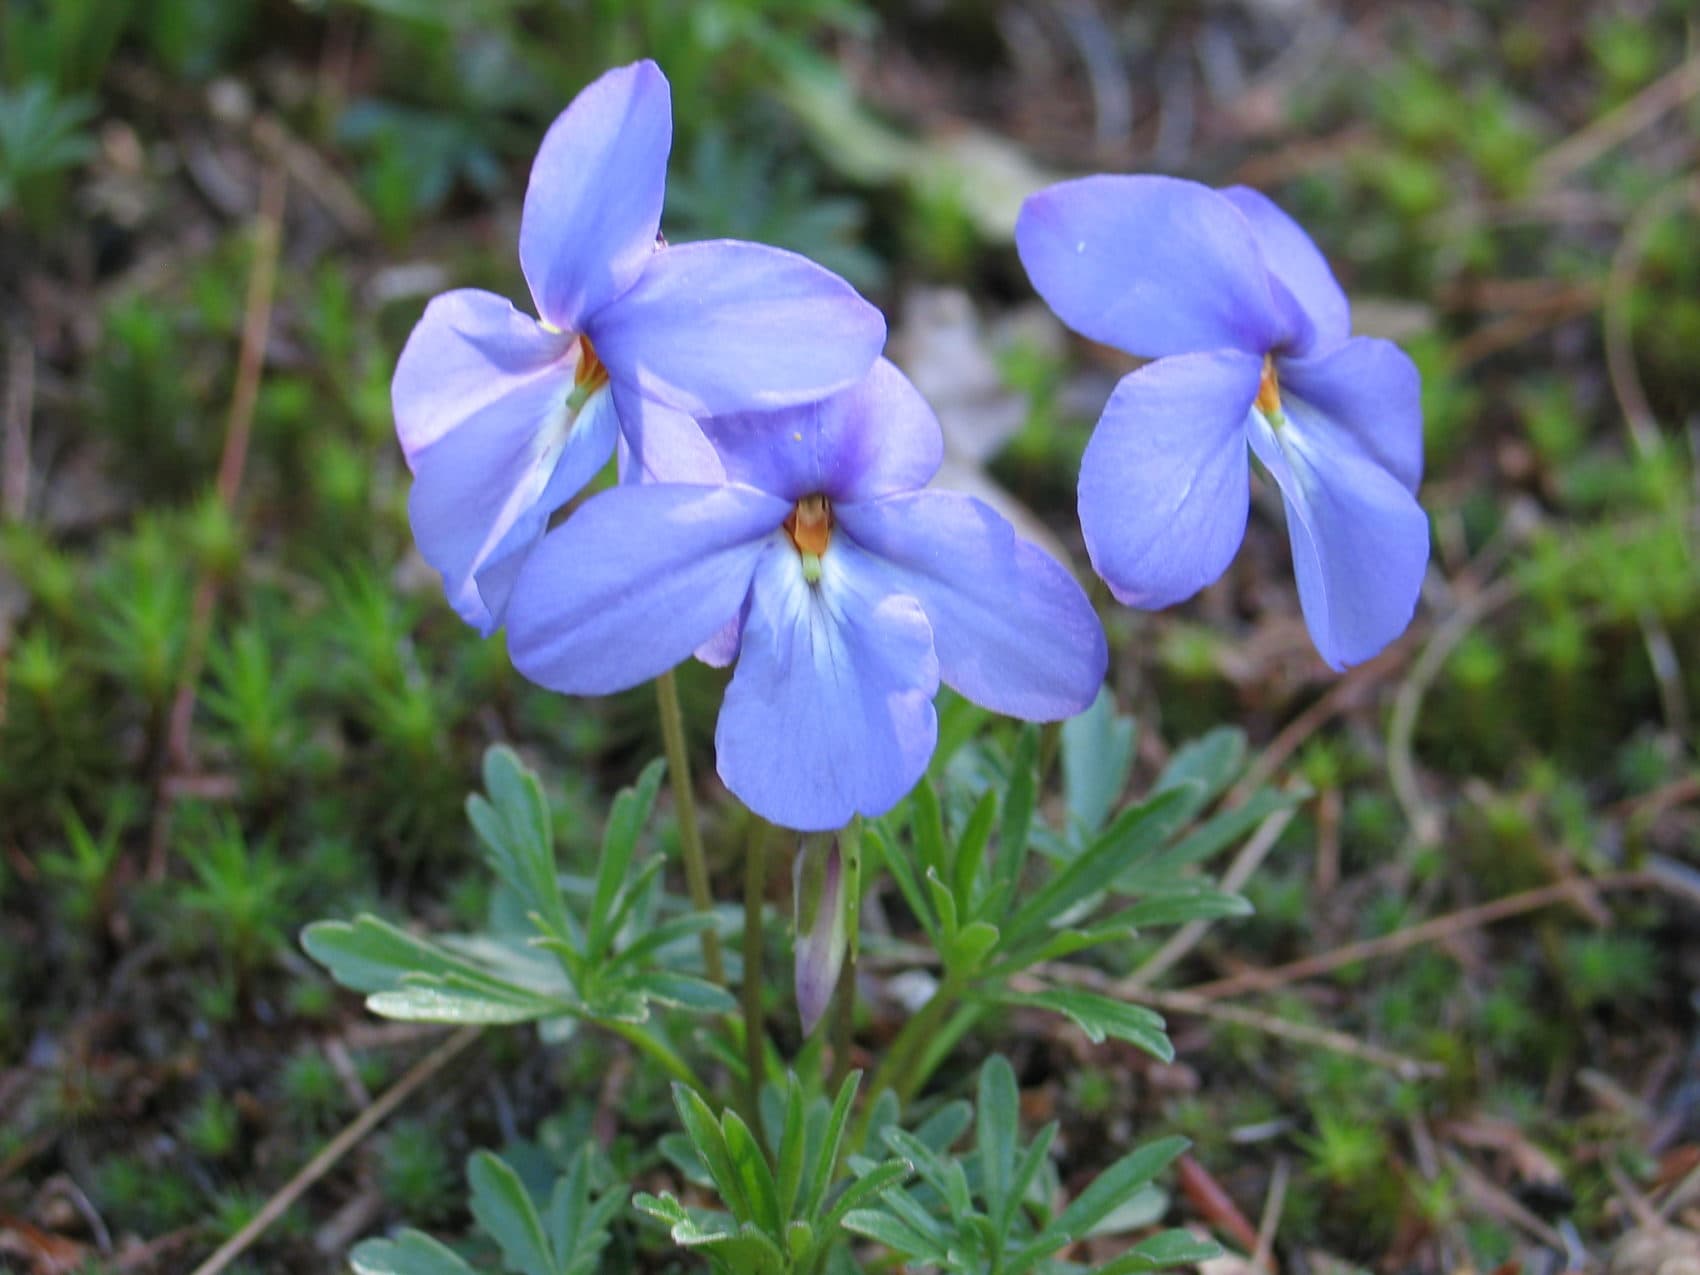 Bird’s foot violets and other orchid species have declined in abundance. (Courtesy of Richard Primack)